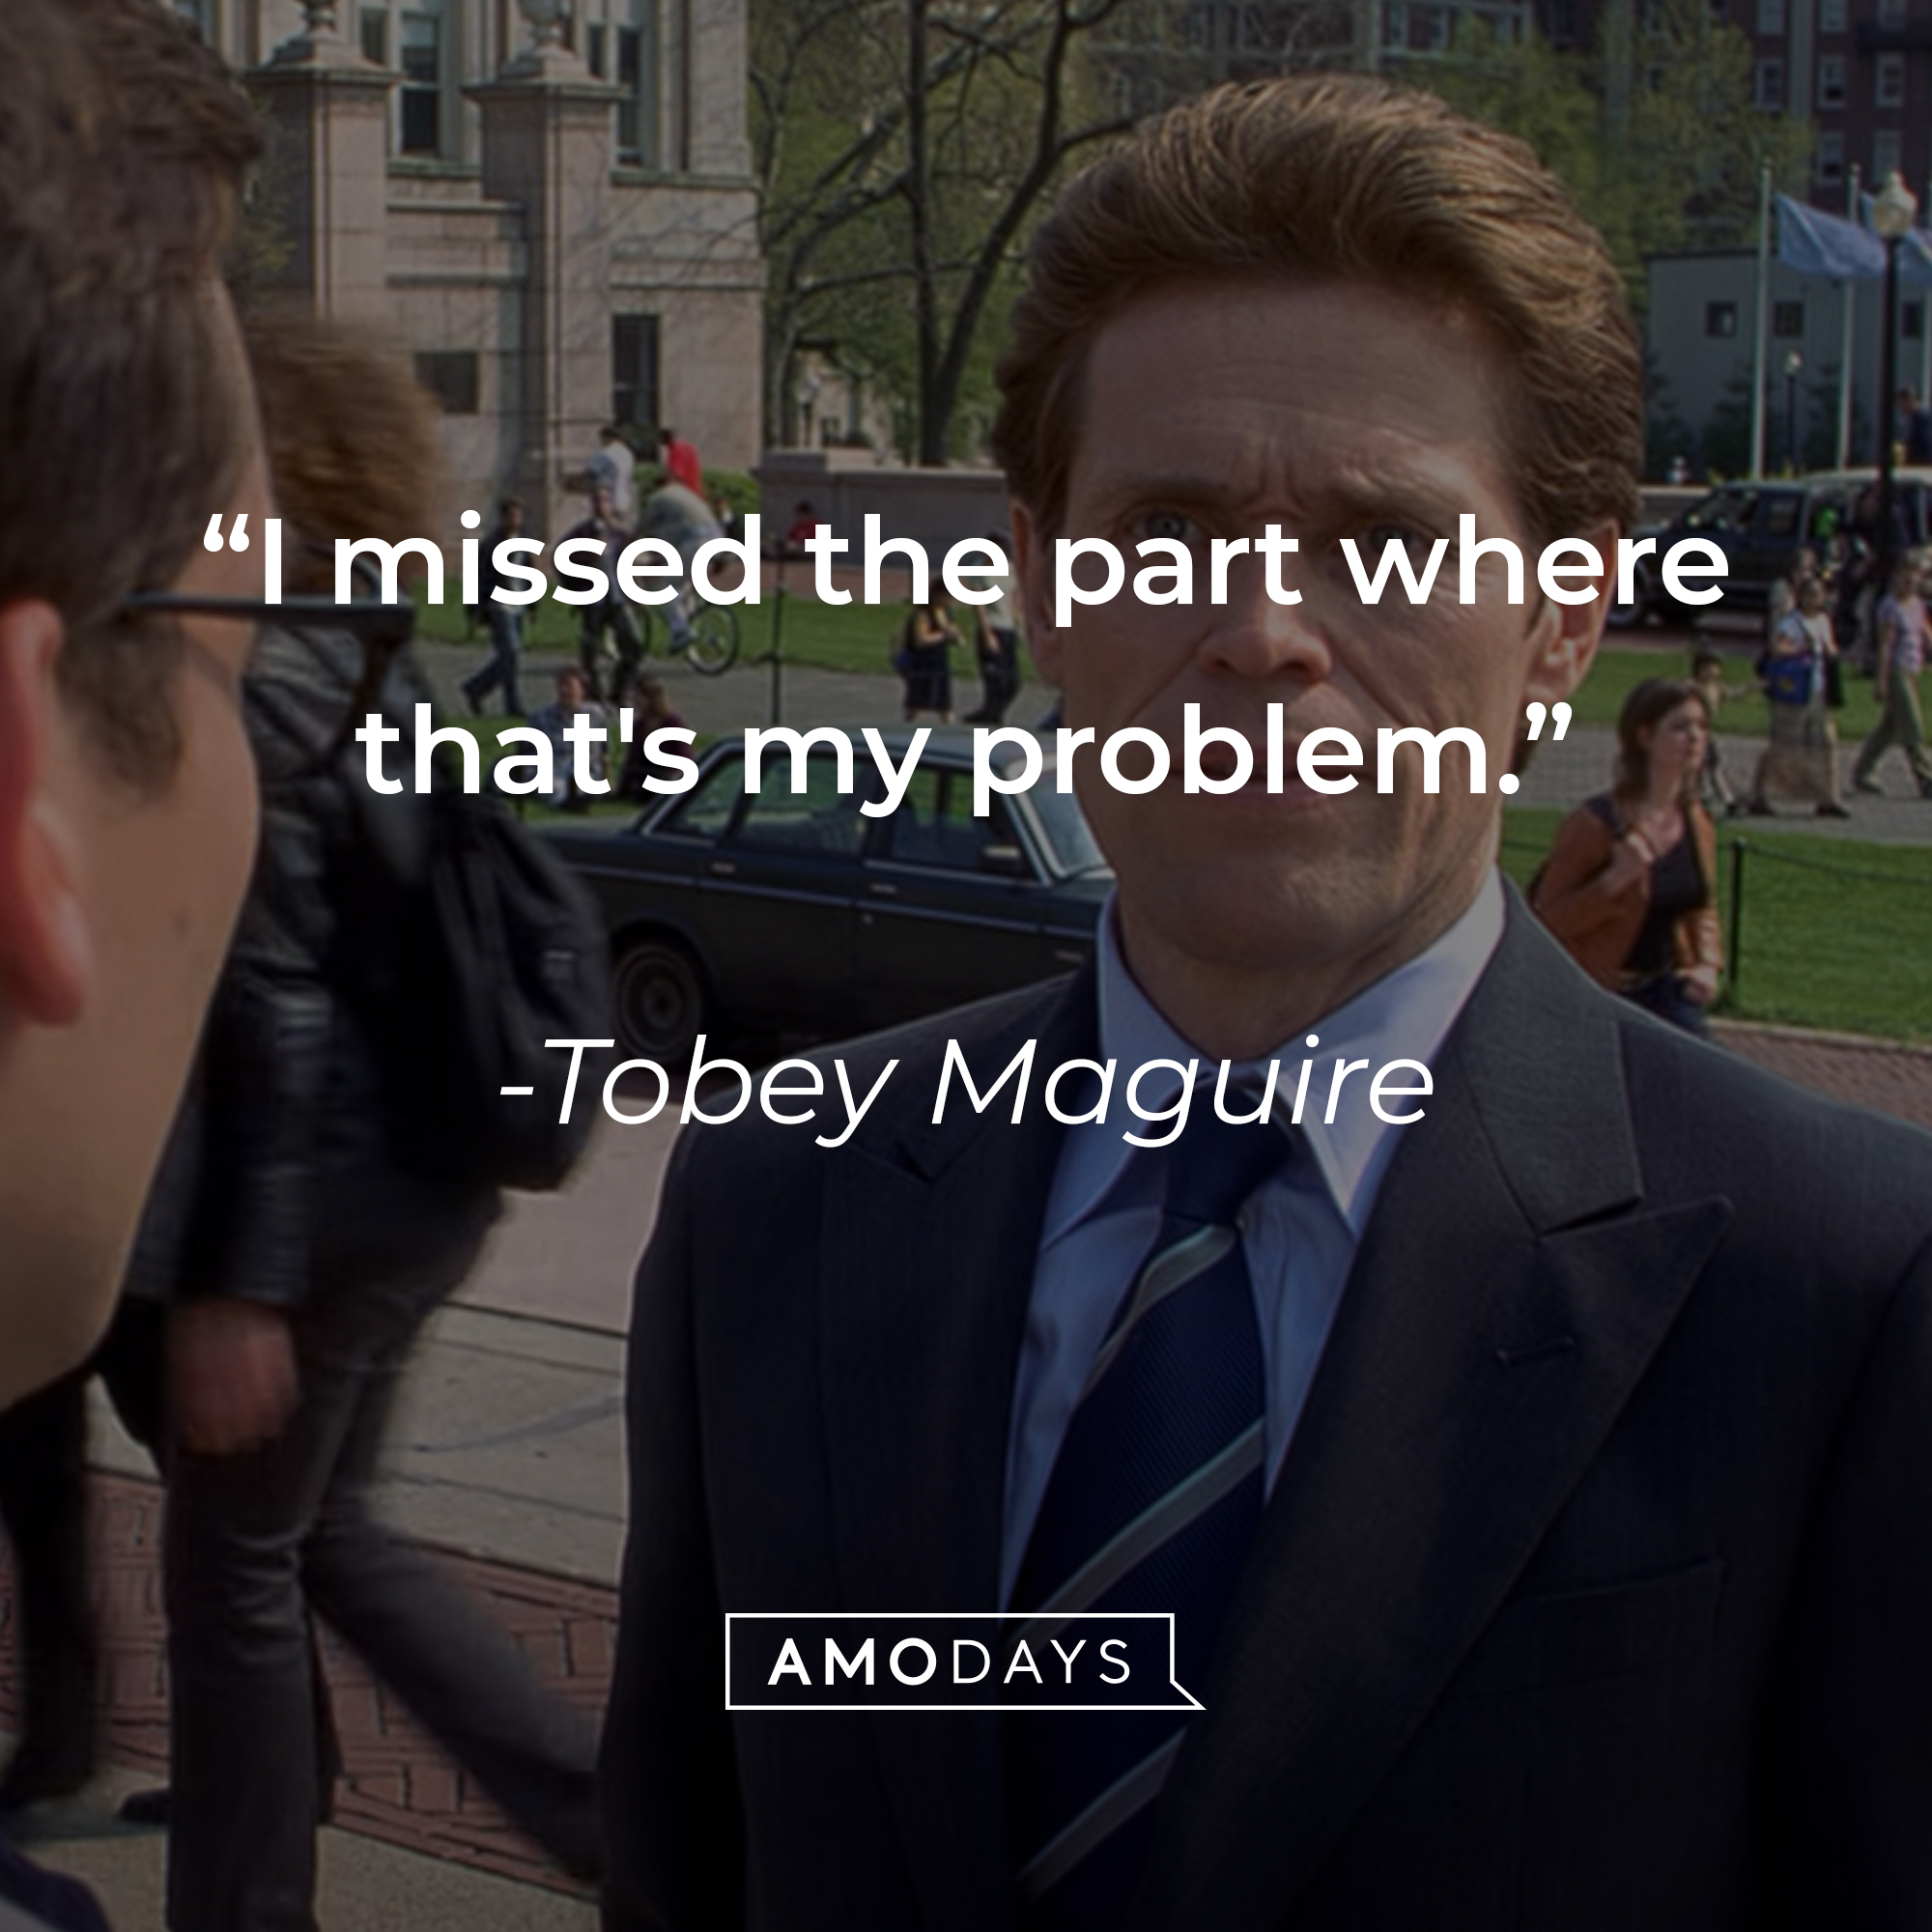 Tobey Maguire's quote: “I missed the part where that's my problem.” | Source: youtube.com/sonypictures